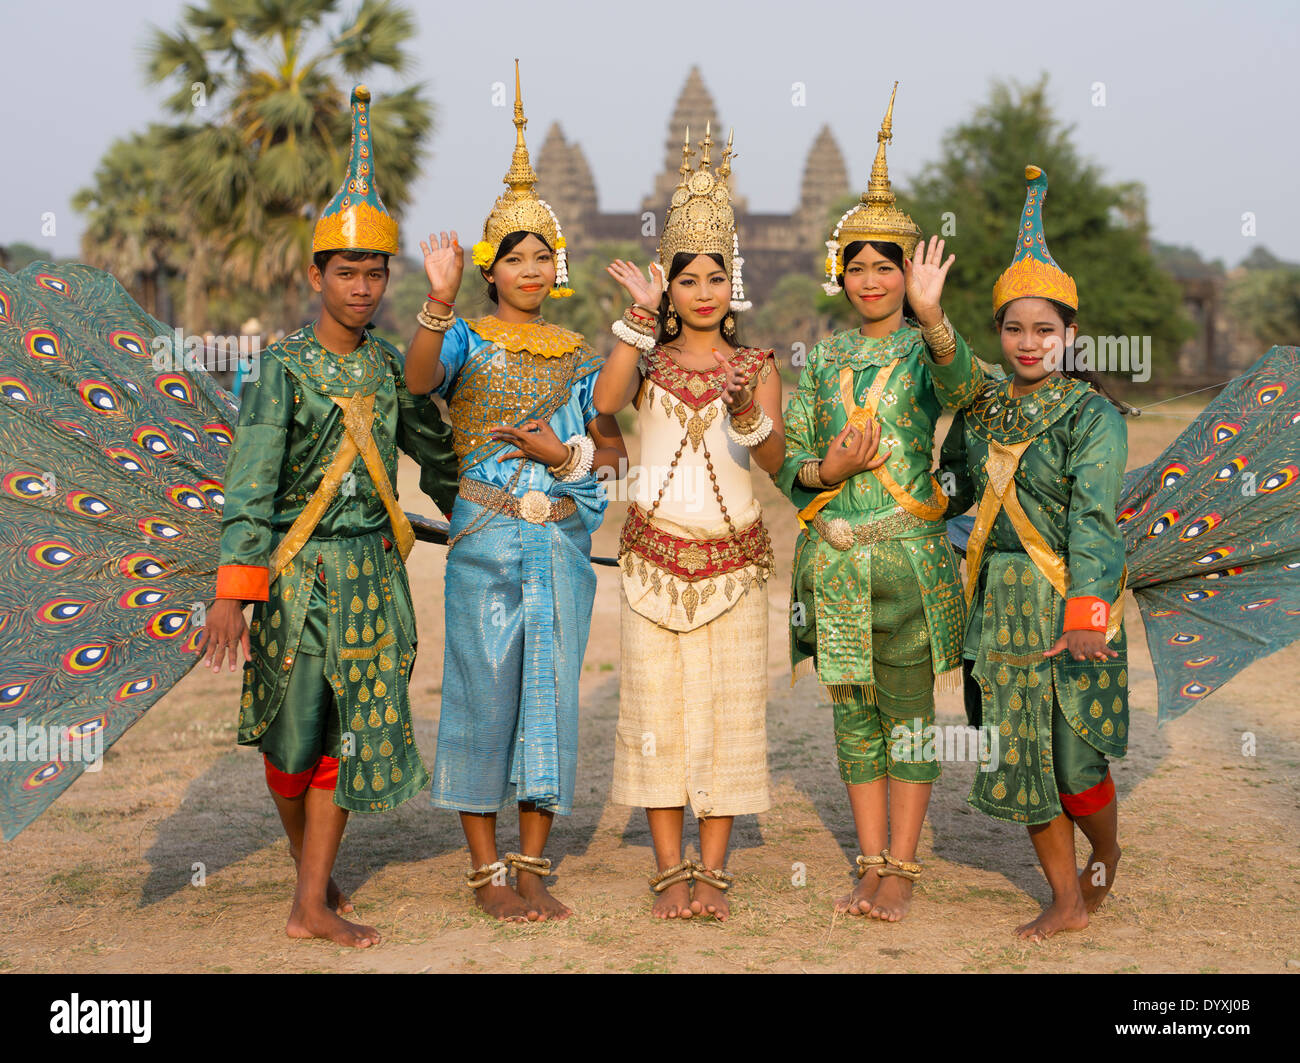 Khmer traditional dancers in costume at Angkor Wat Temple, Siem Reap, Cambodia Stock Photo